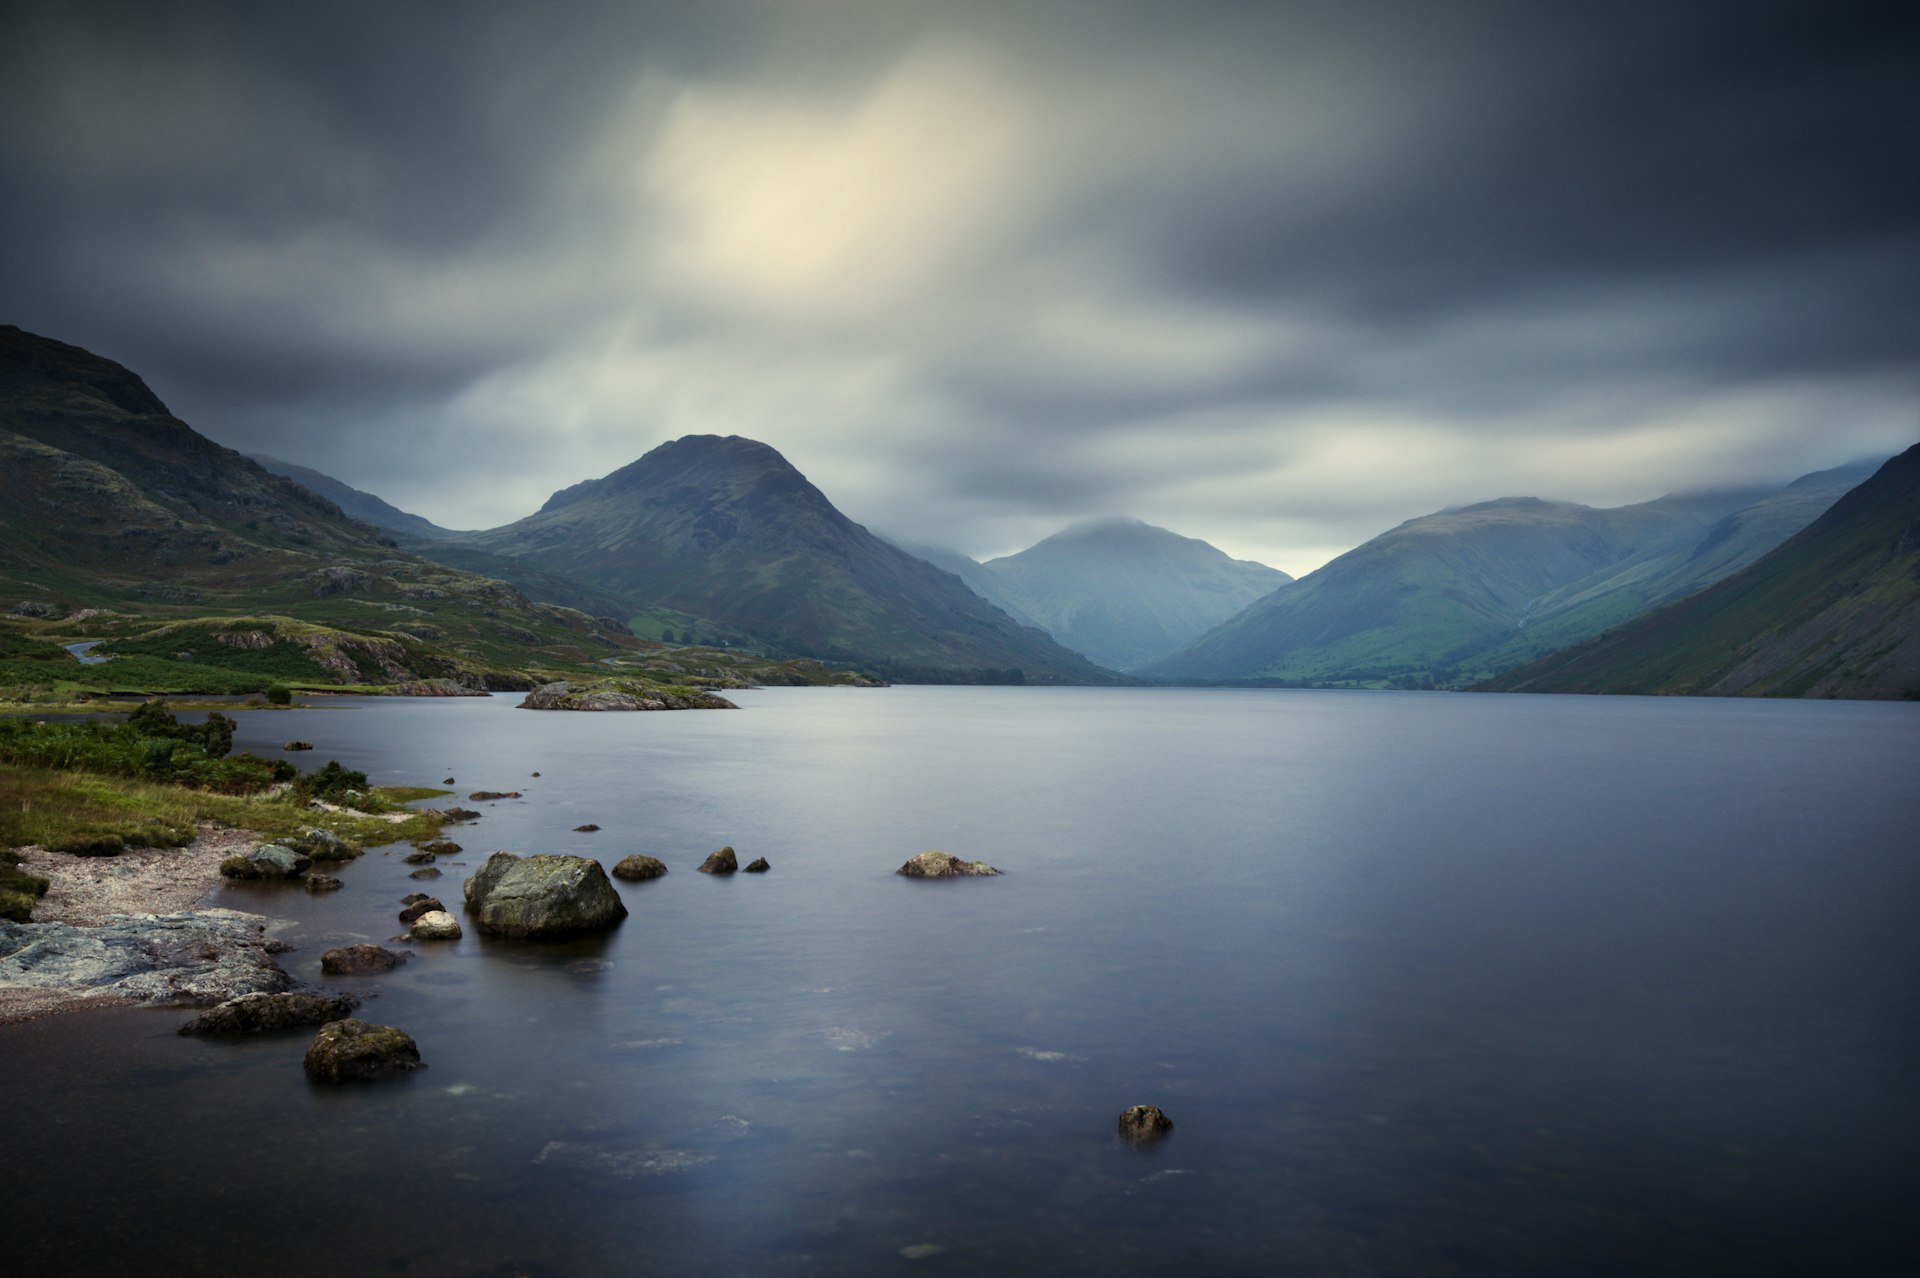 A moody shot of a mountain peak rising above a lake with low grey clouds in the sky